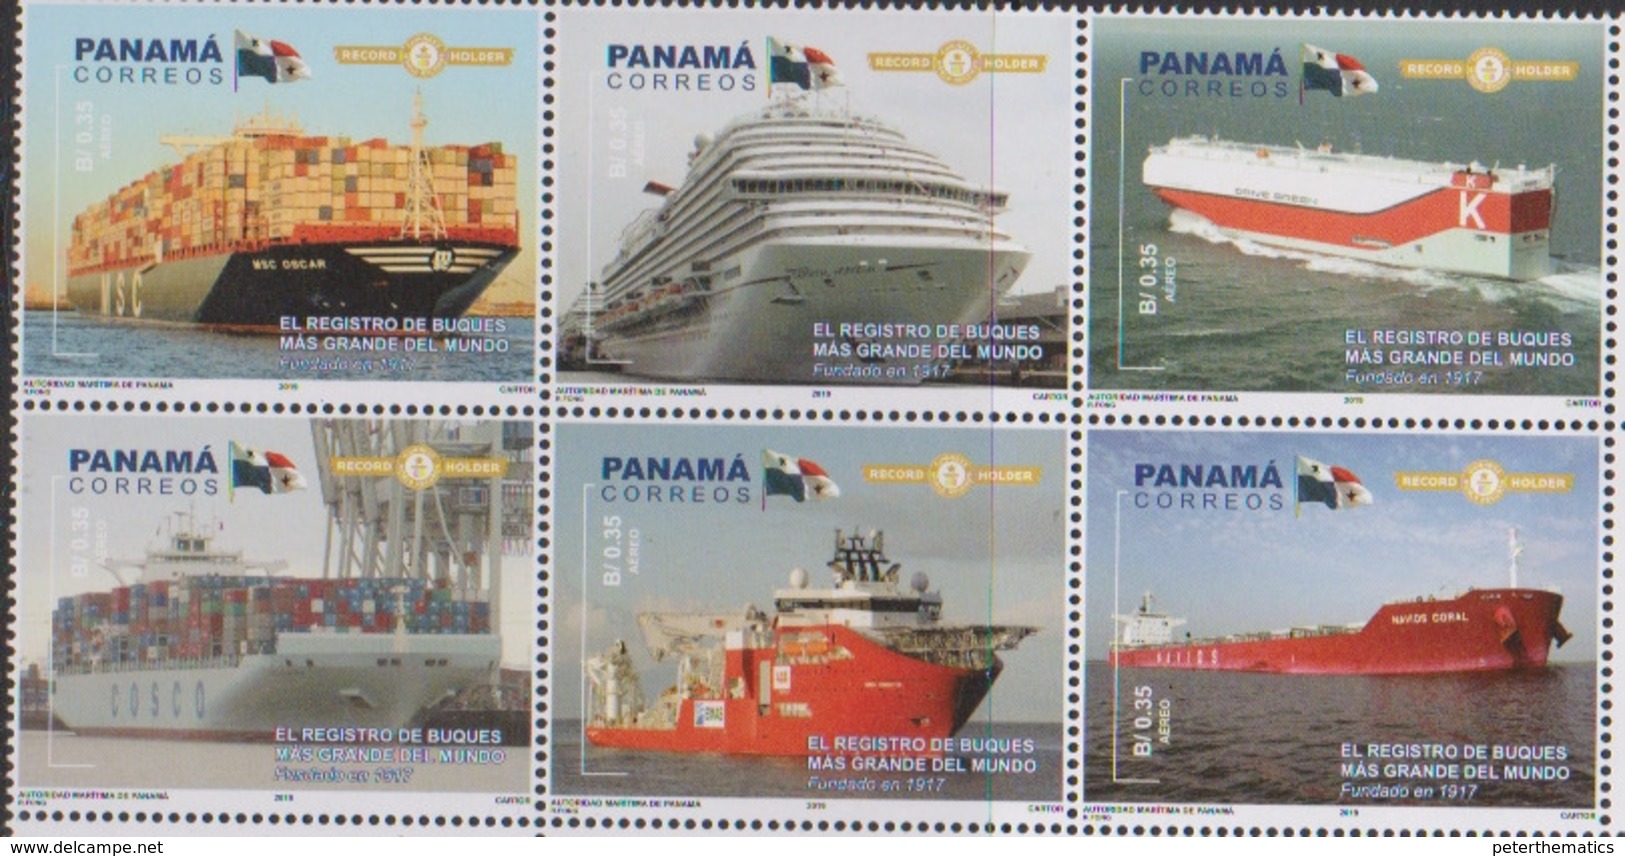 PANAMA, 2019, MNH,SHIPS, CARGO SHIPS, THE LARGEST SHIP REGISTRY IN THE WORLD, 8v - Ships